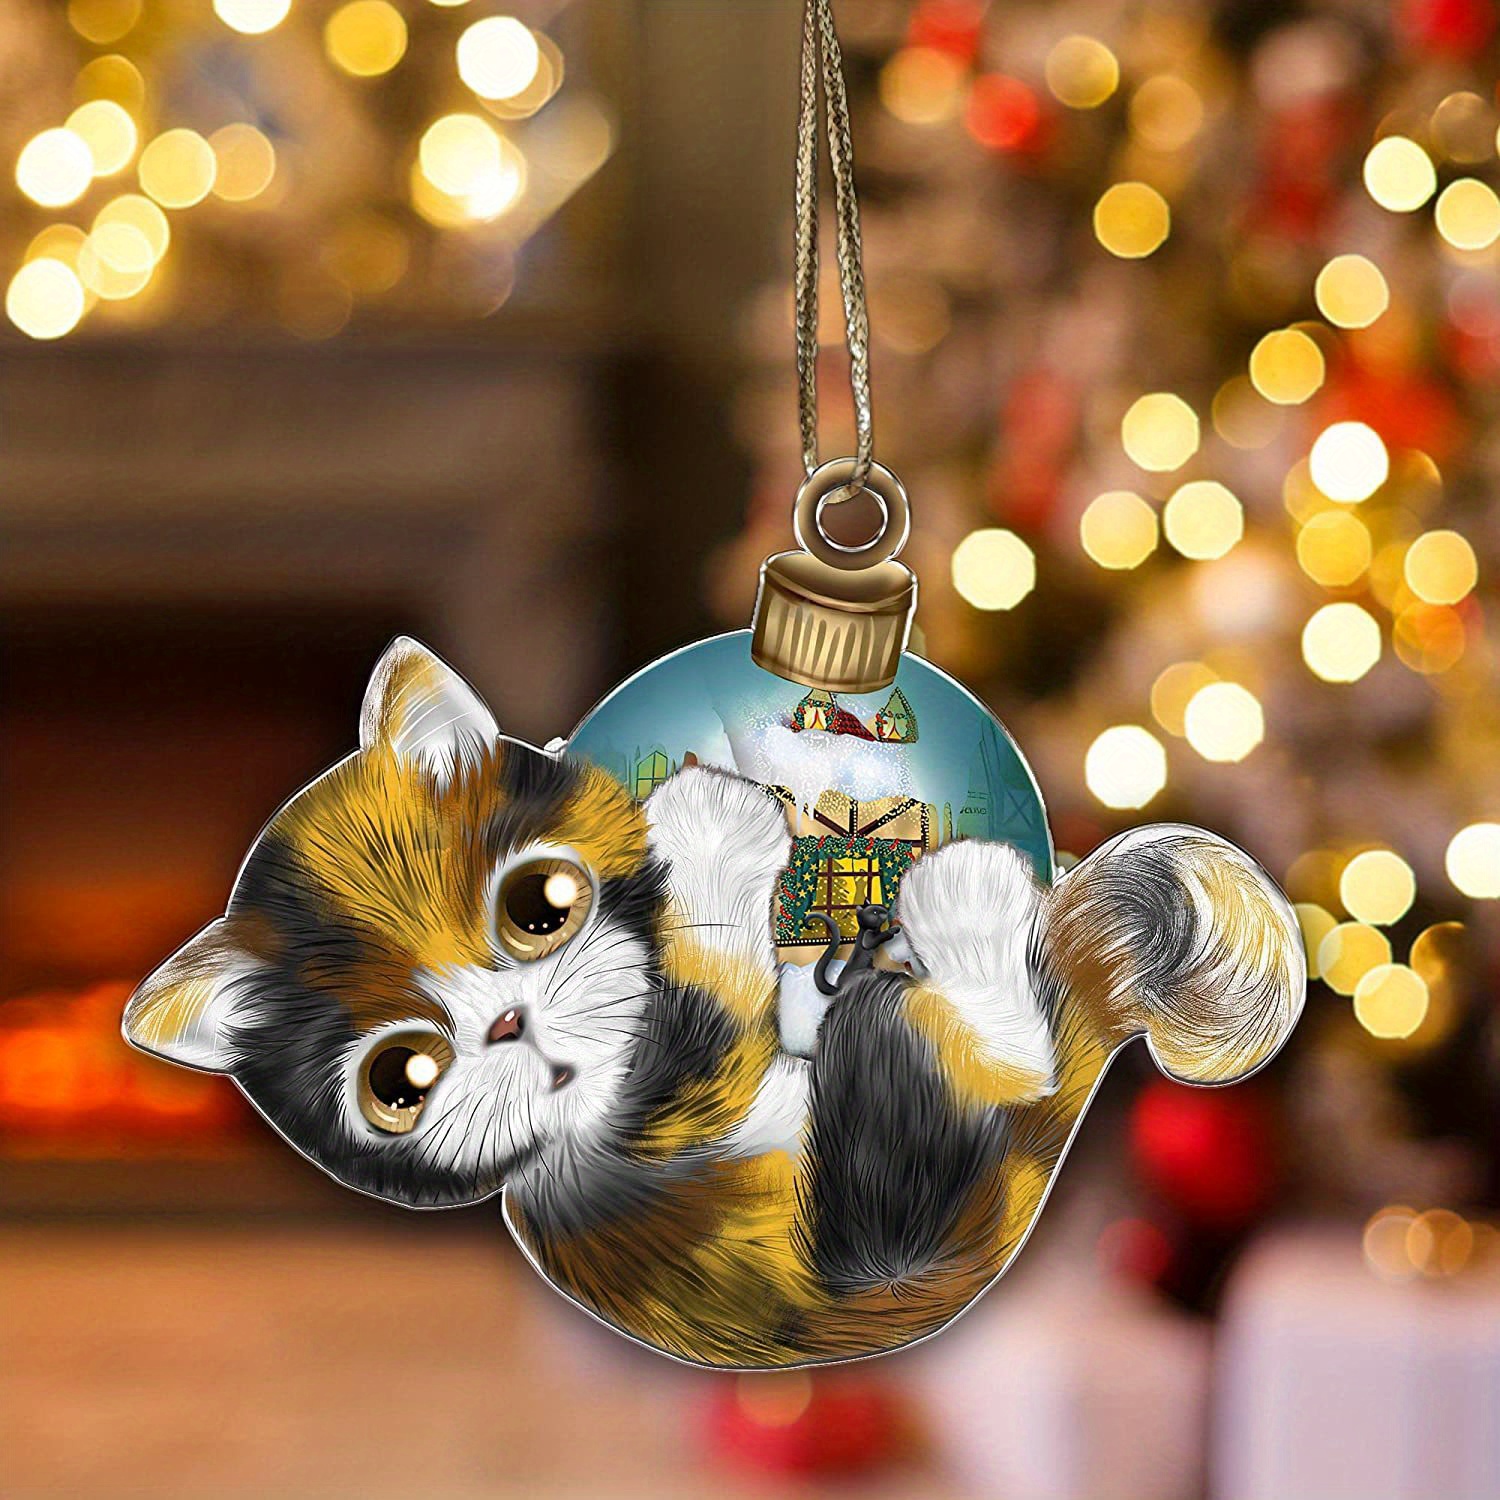 LmtimeCar Rear View Hanging Accessories Cute Cat Pendant Novelty Funny  Decoration For Trailer Interior Ornament Tree Ornaments 